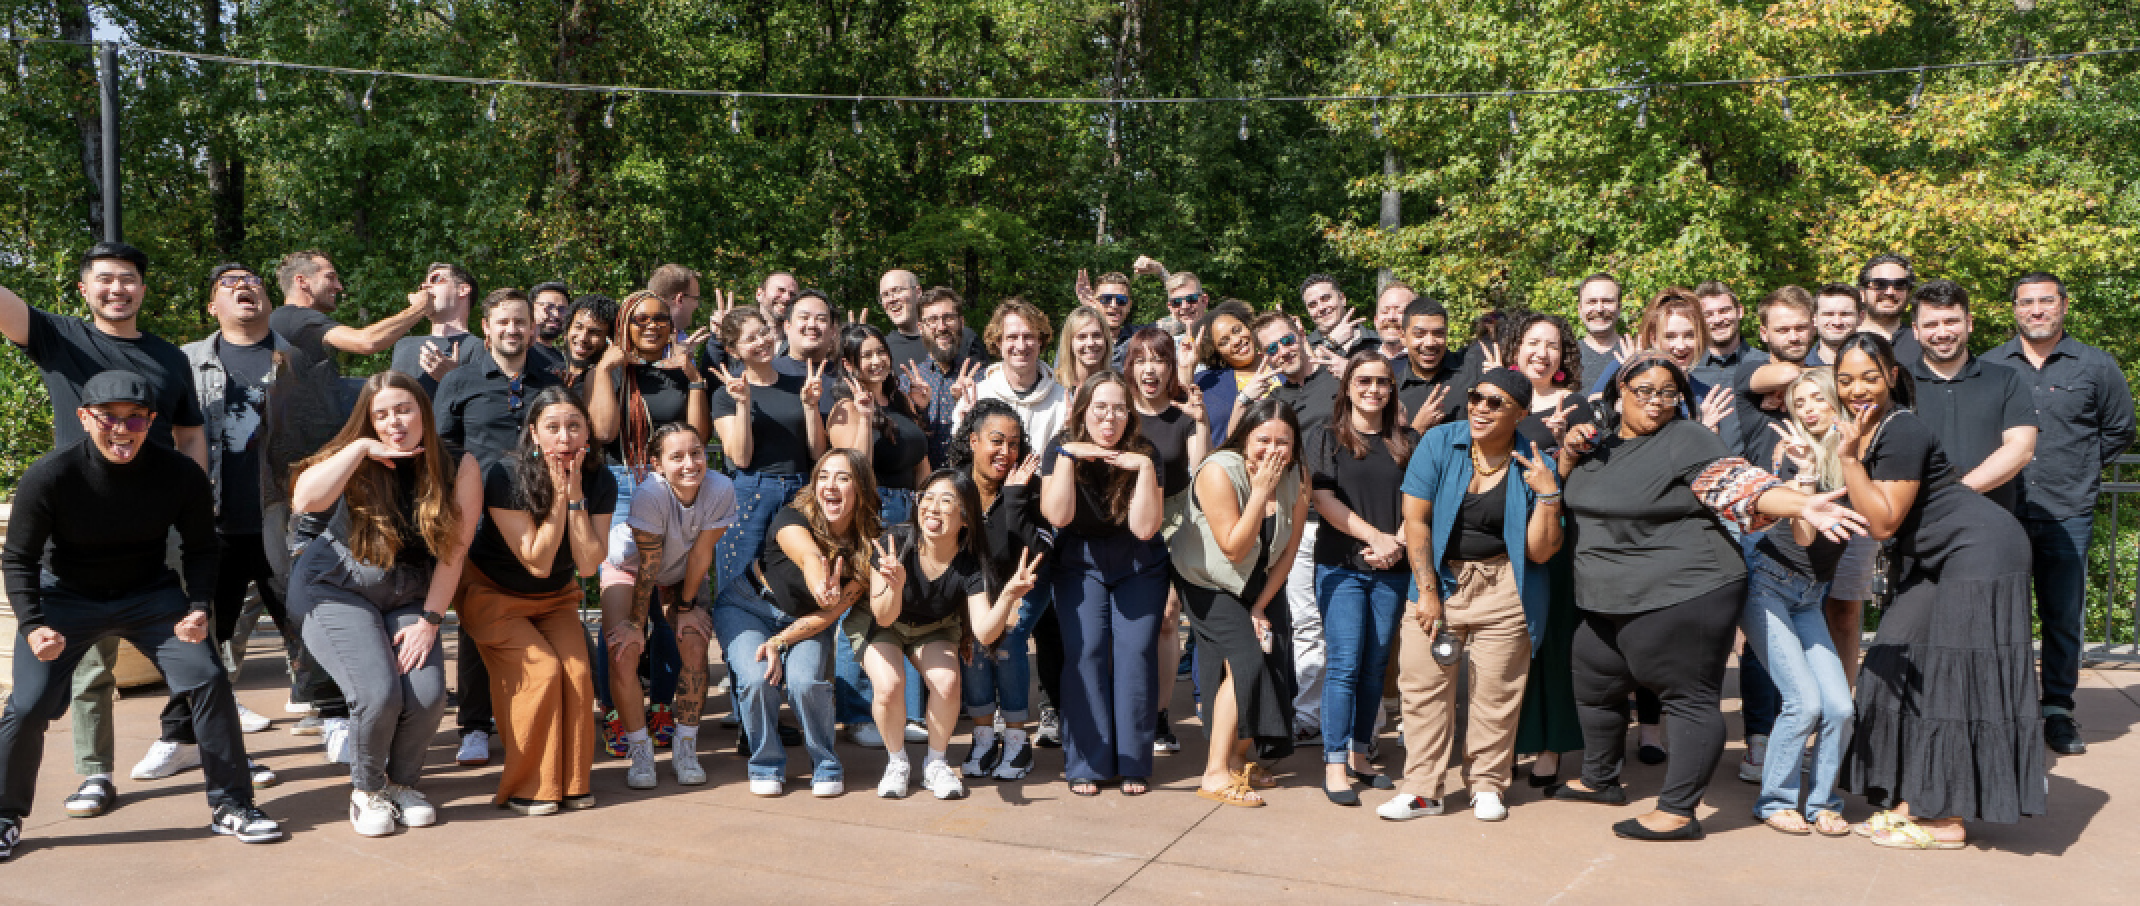 Employees posing for a group photo at an offsite retreat.